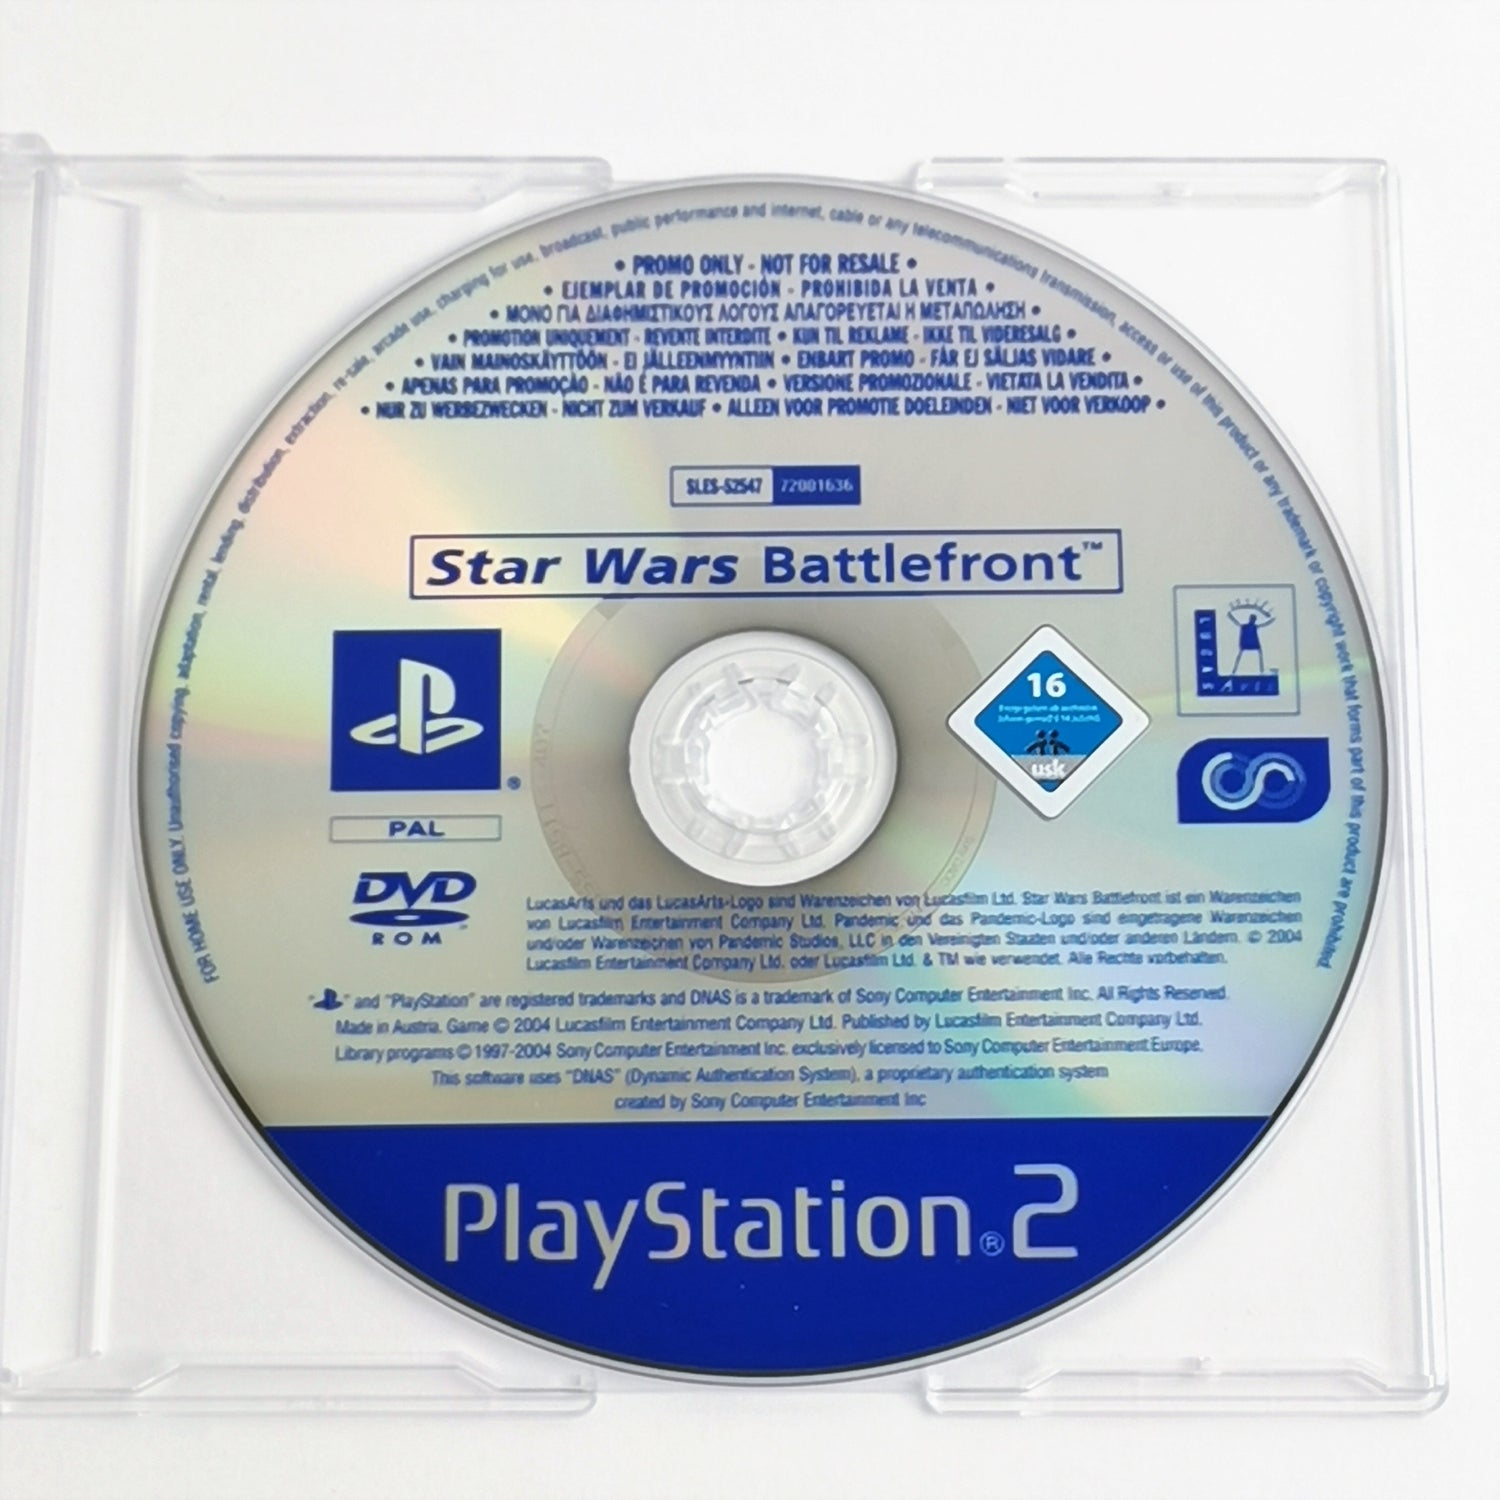 Sony Playstation 2 Promo Game: Star Wars Battlefront - PS2 PAL